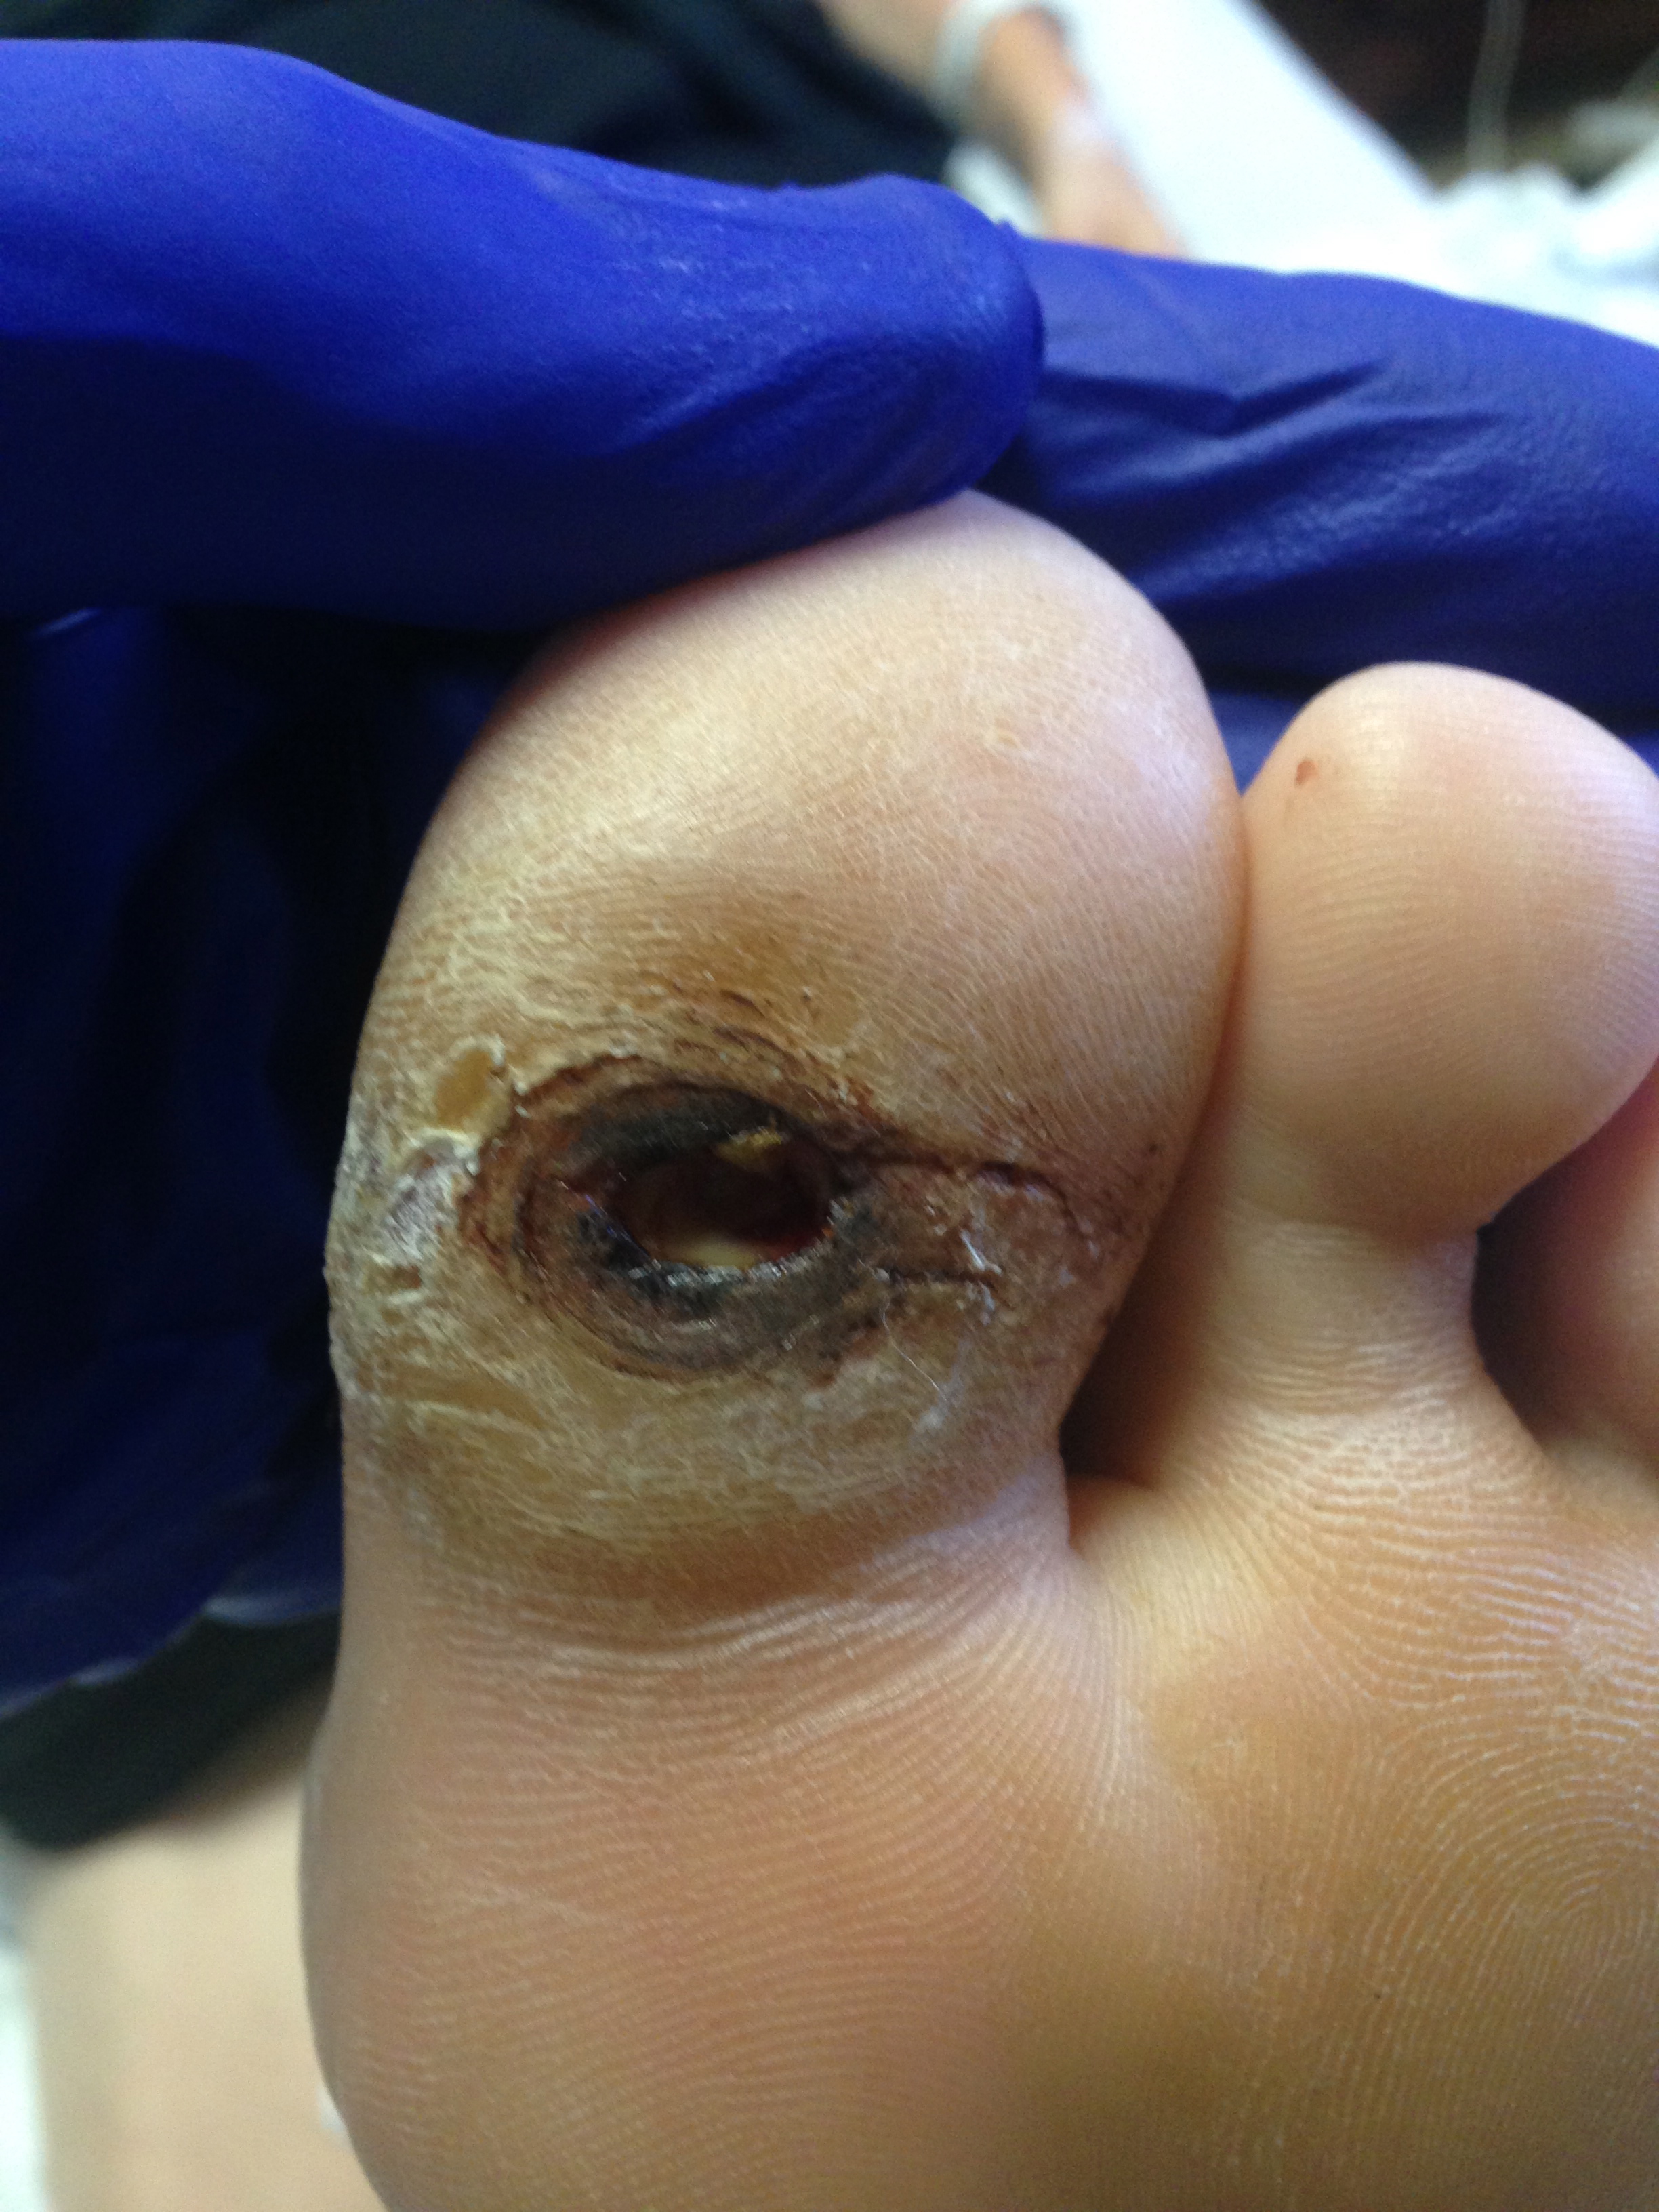 Neuropathic Ulcer
Located beneath great toe in a patient with diabetes and peripheral neuropathy.